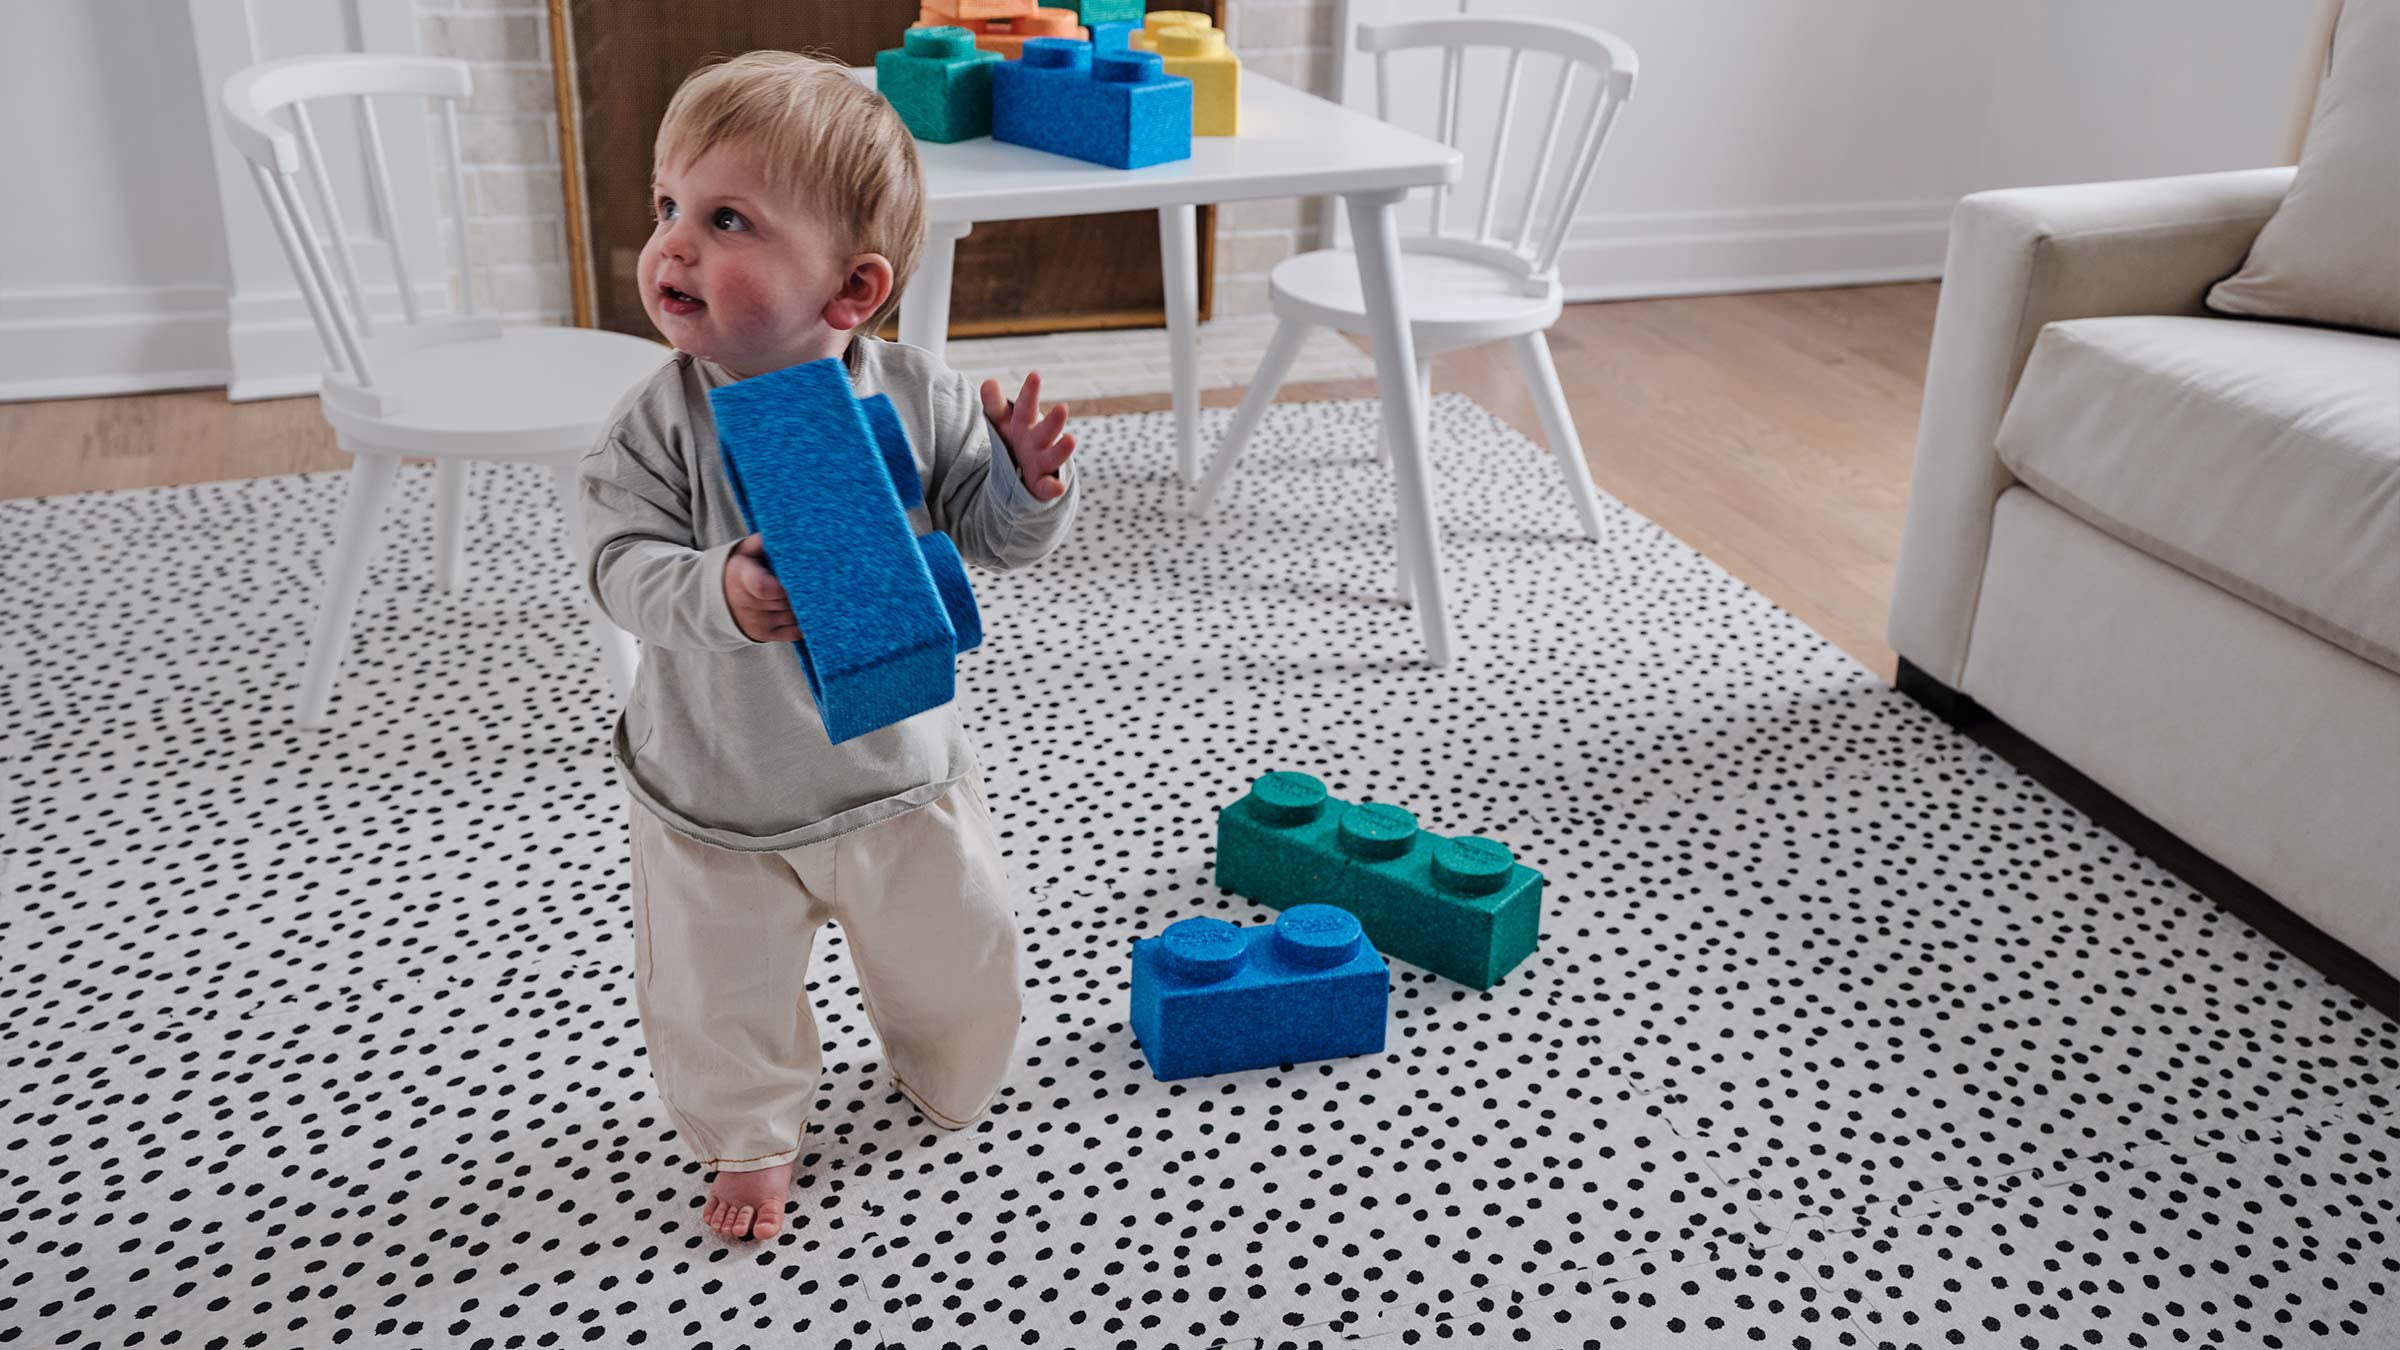 Apollo pepper black and white polka dot play mat shown in living room with baby carrying lego blocks